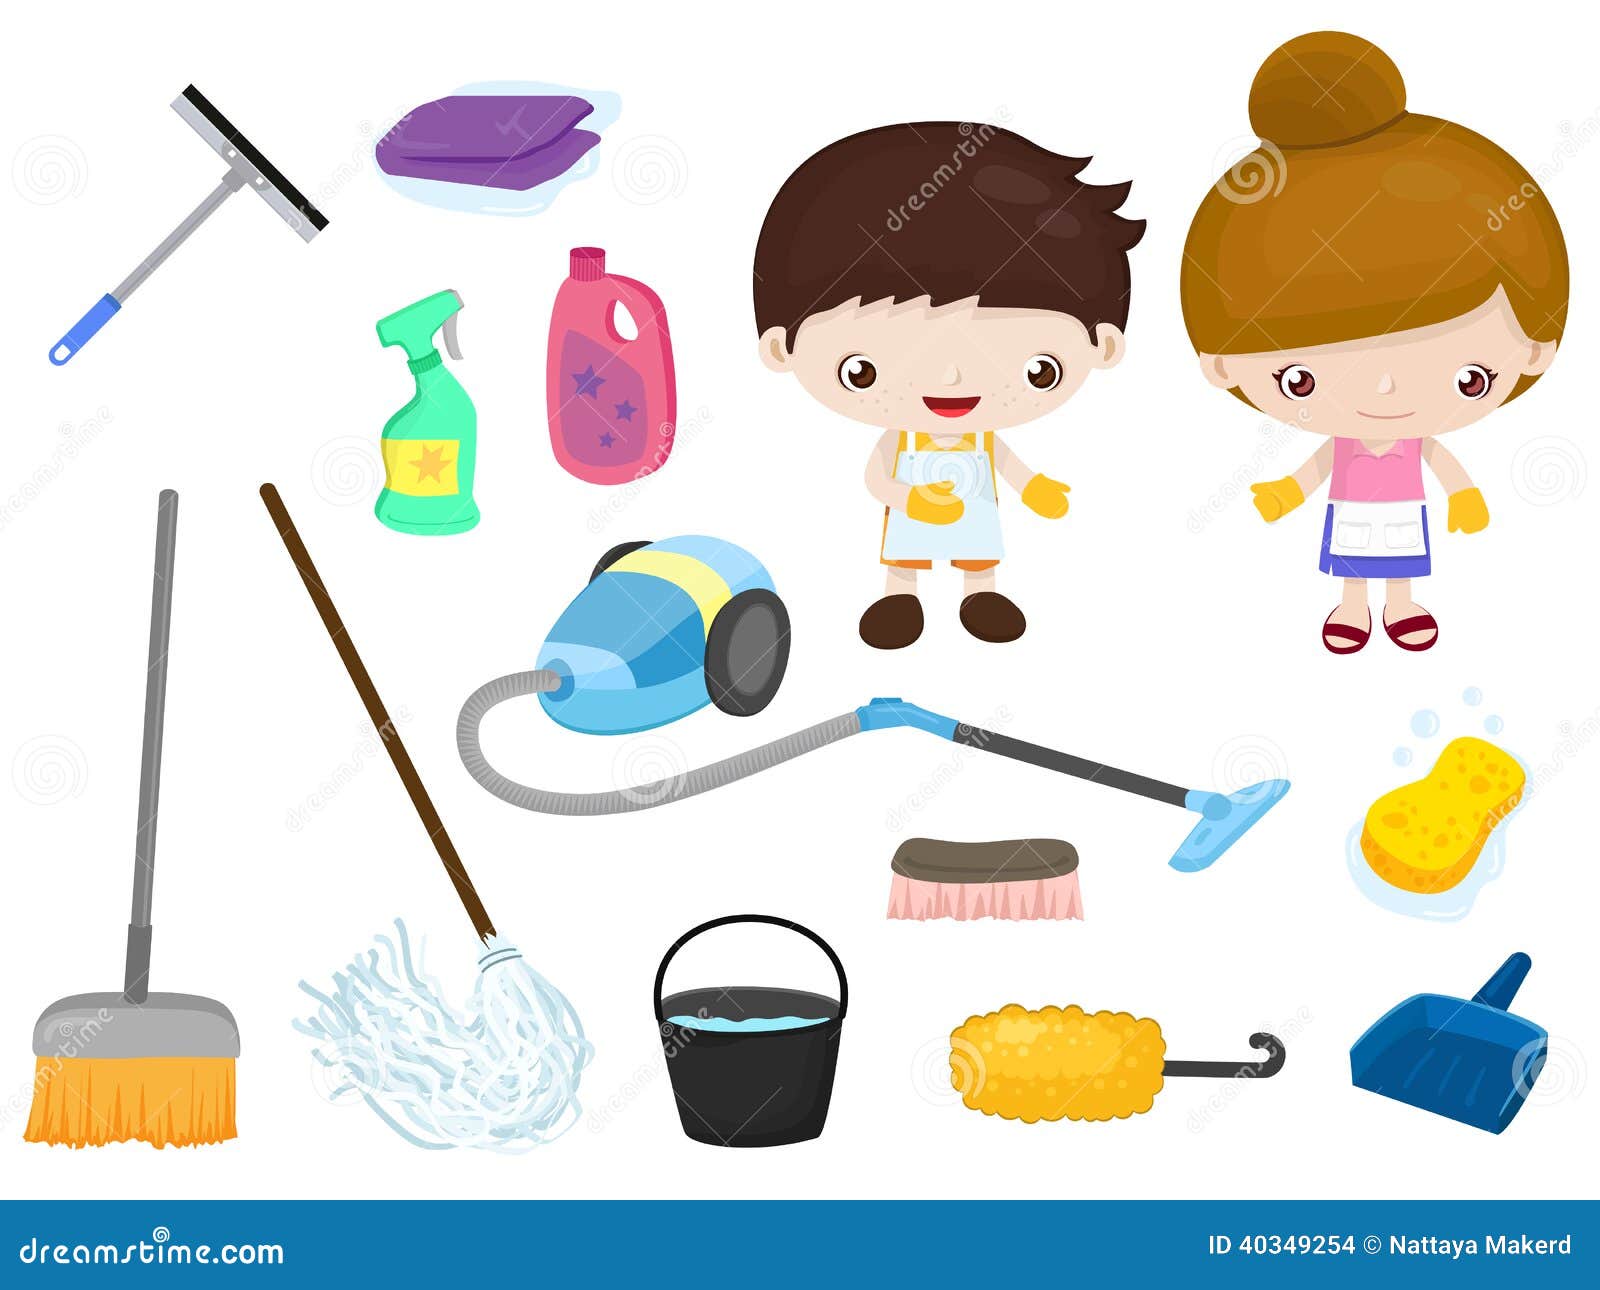 Tools Cleaning Stock Illustrations – 9,405 Tools Cleaning Stock  Illustrations, Vectors & Clipart - Dreamstime